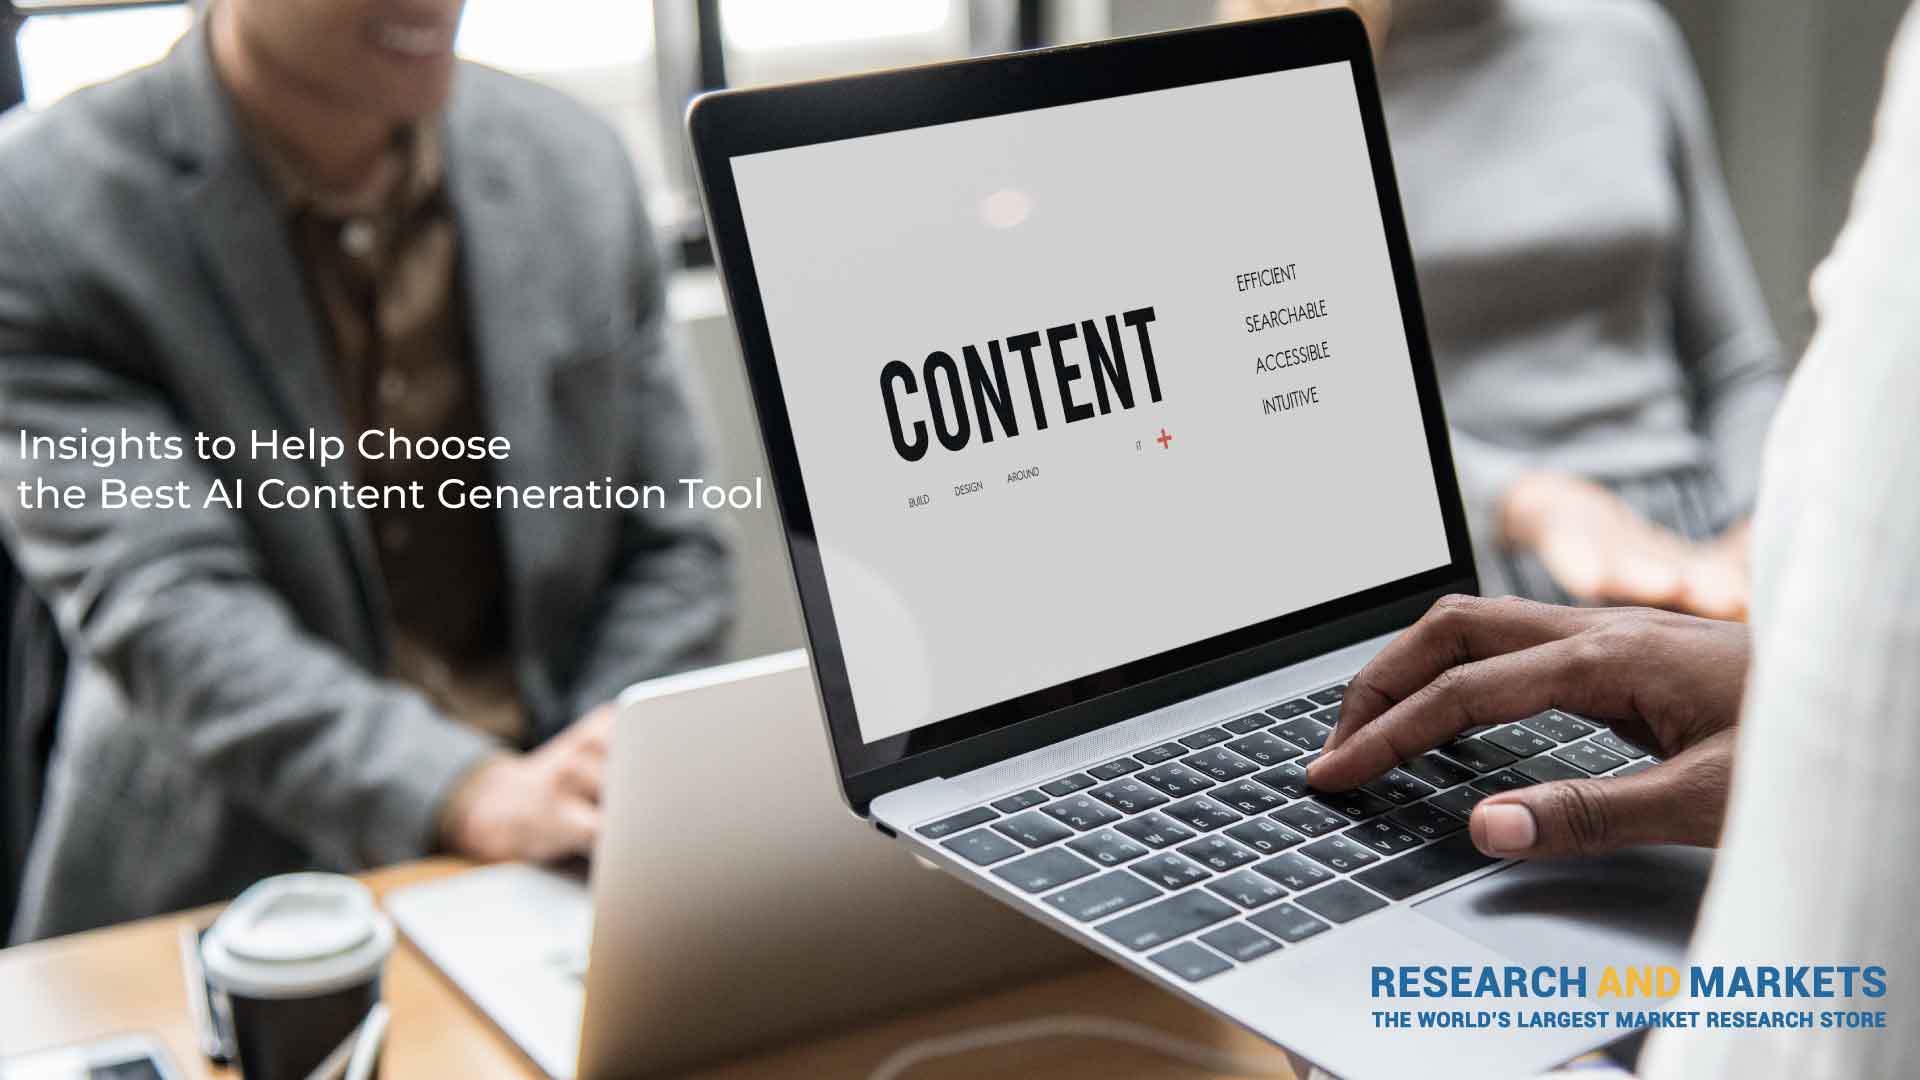 Insights for Internal Marketing and Communication Teams to Help Choose the Best AI Content Generation Tool